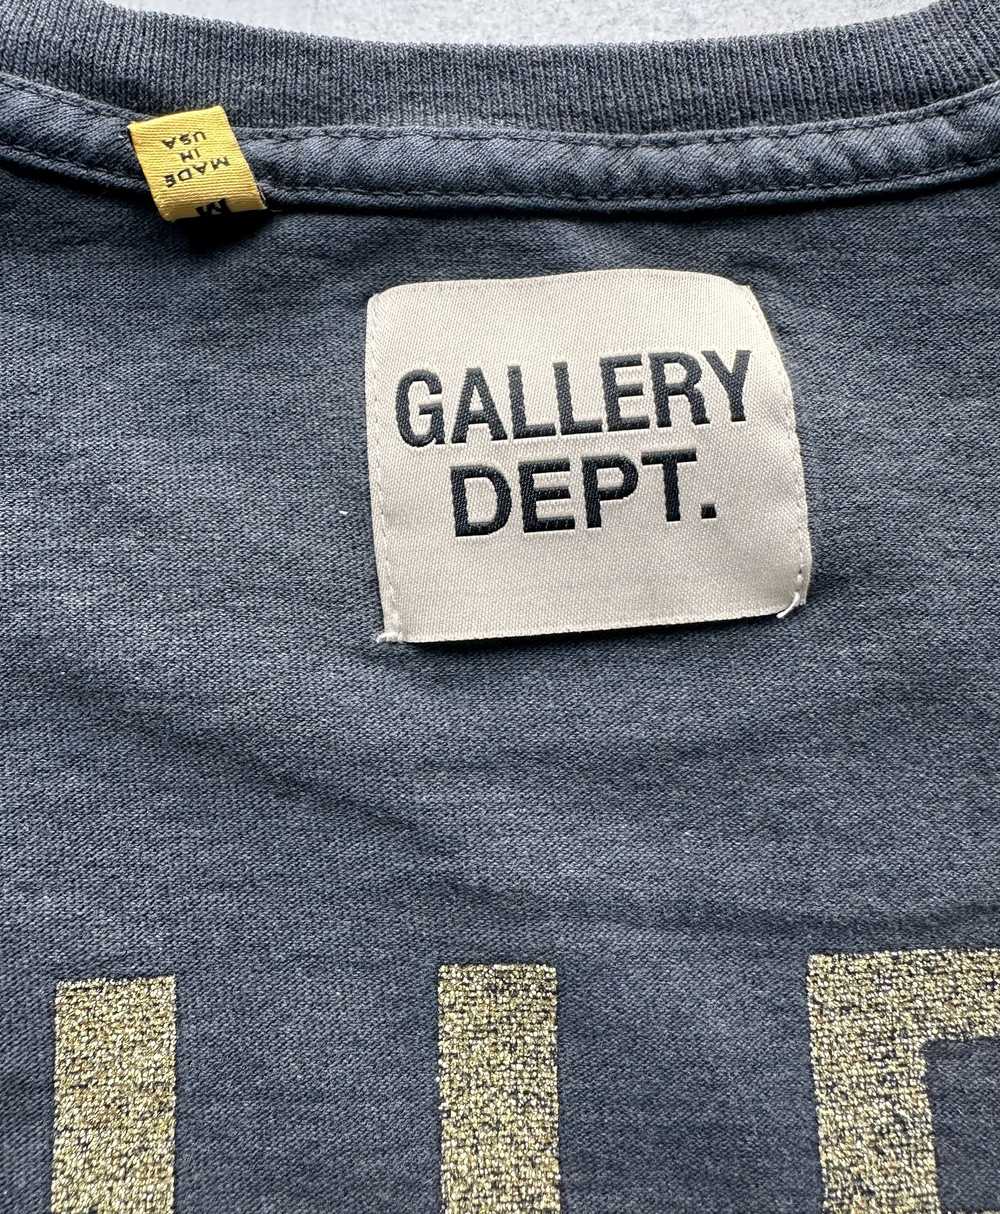 Gallery Dept. Art That Kills French reversible tee - image 4